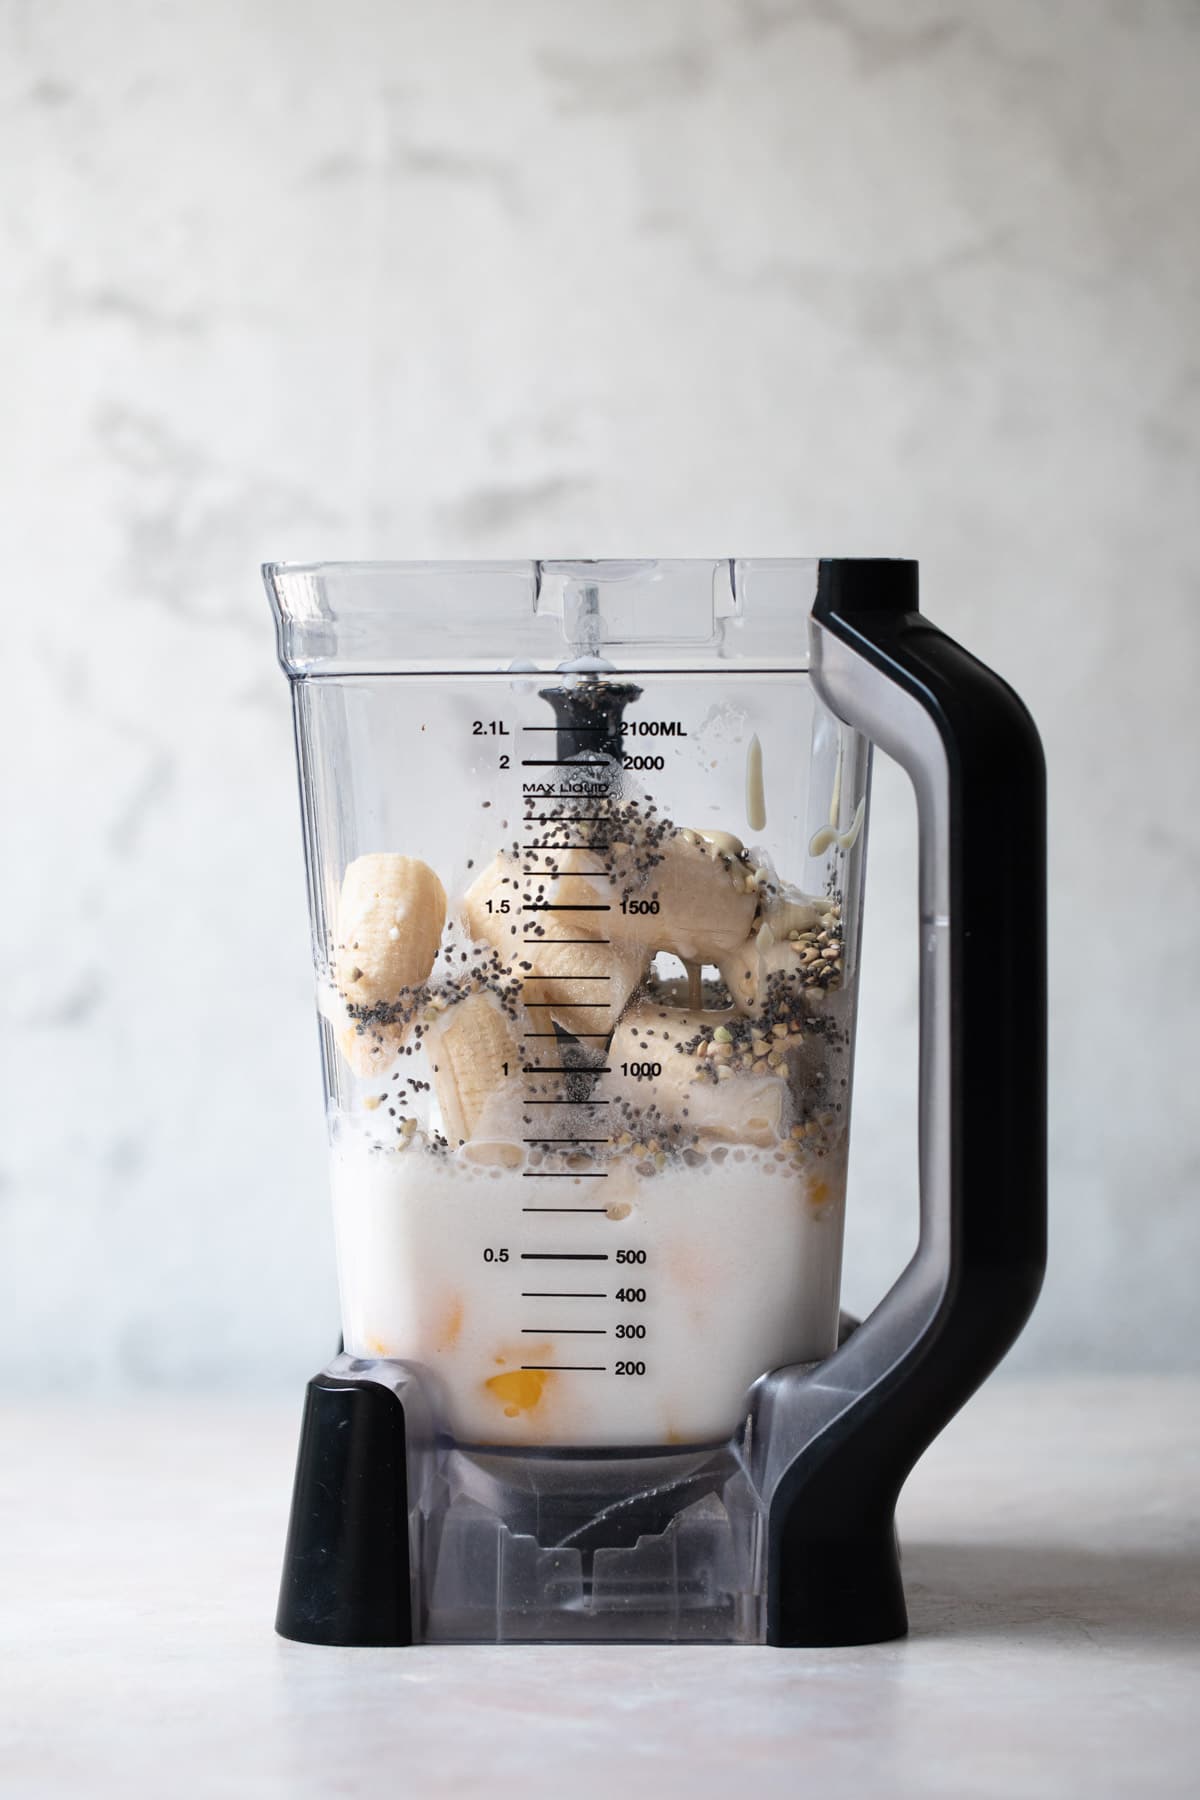 best way to make smoothie - place all ingredients into high powered blender or bullet blender